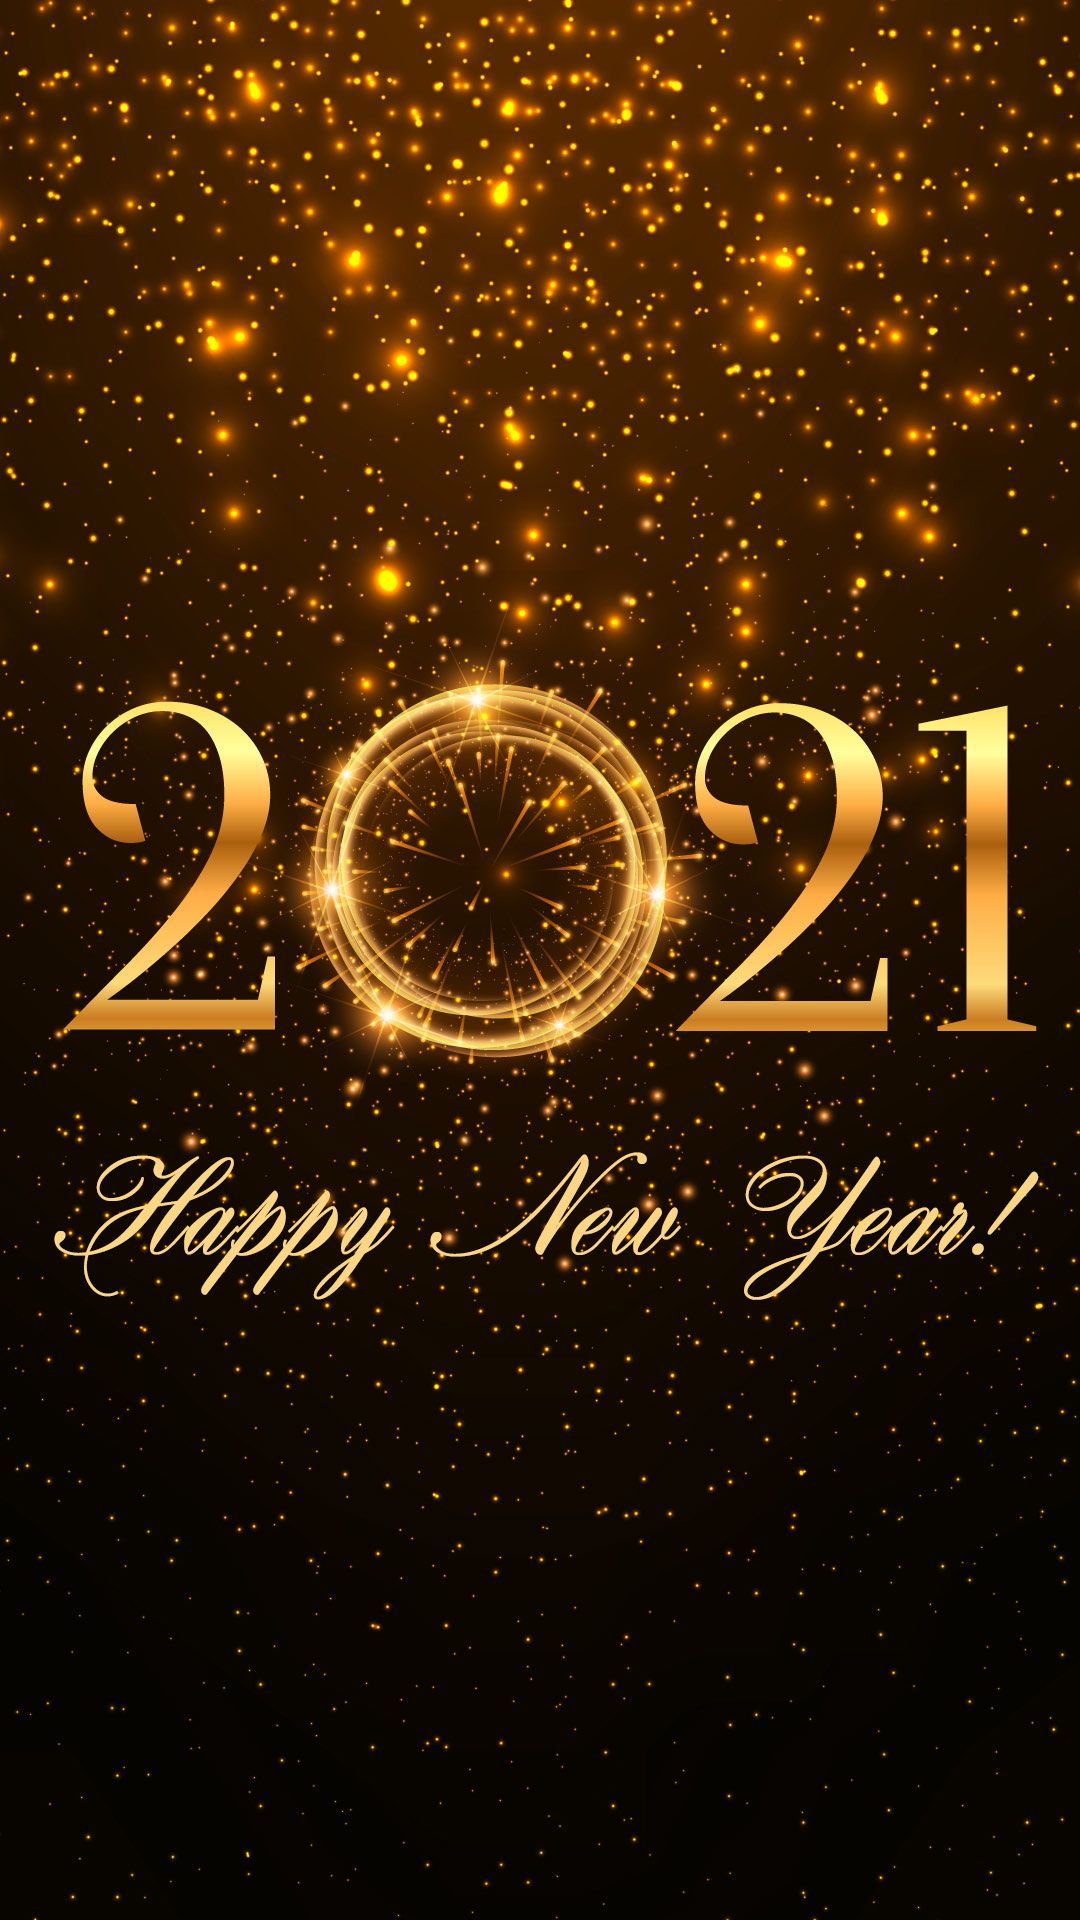 Happy New Year 2021. New year wishes, Happy new year wallpaper, Happy new year picture